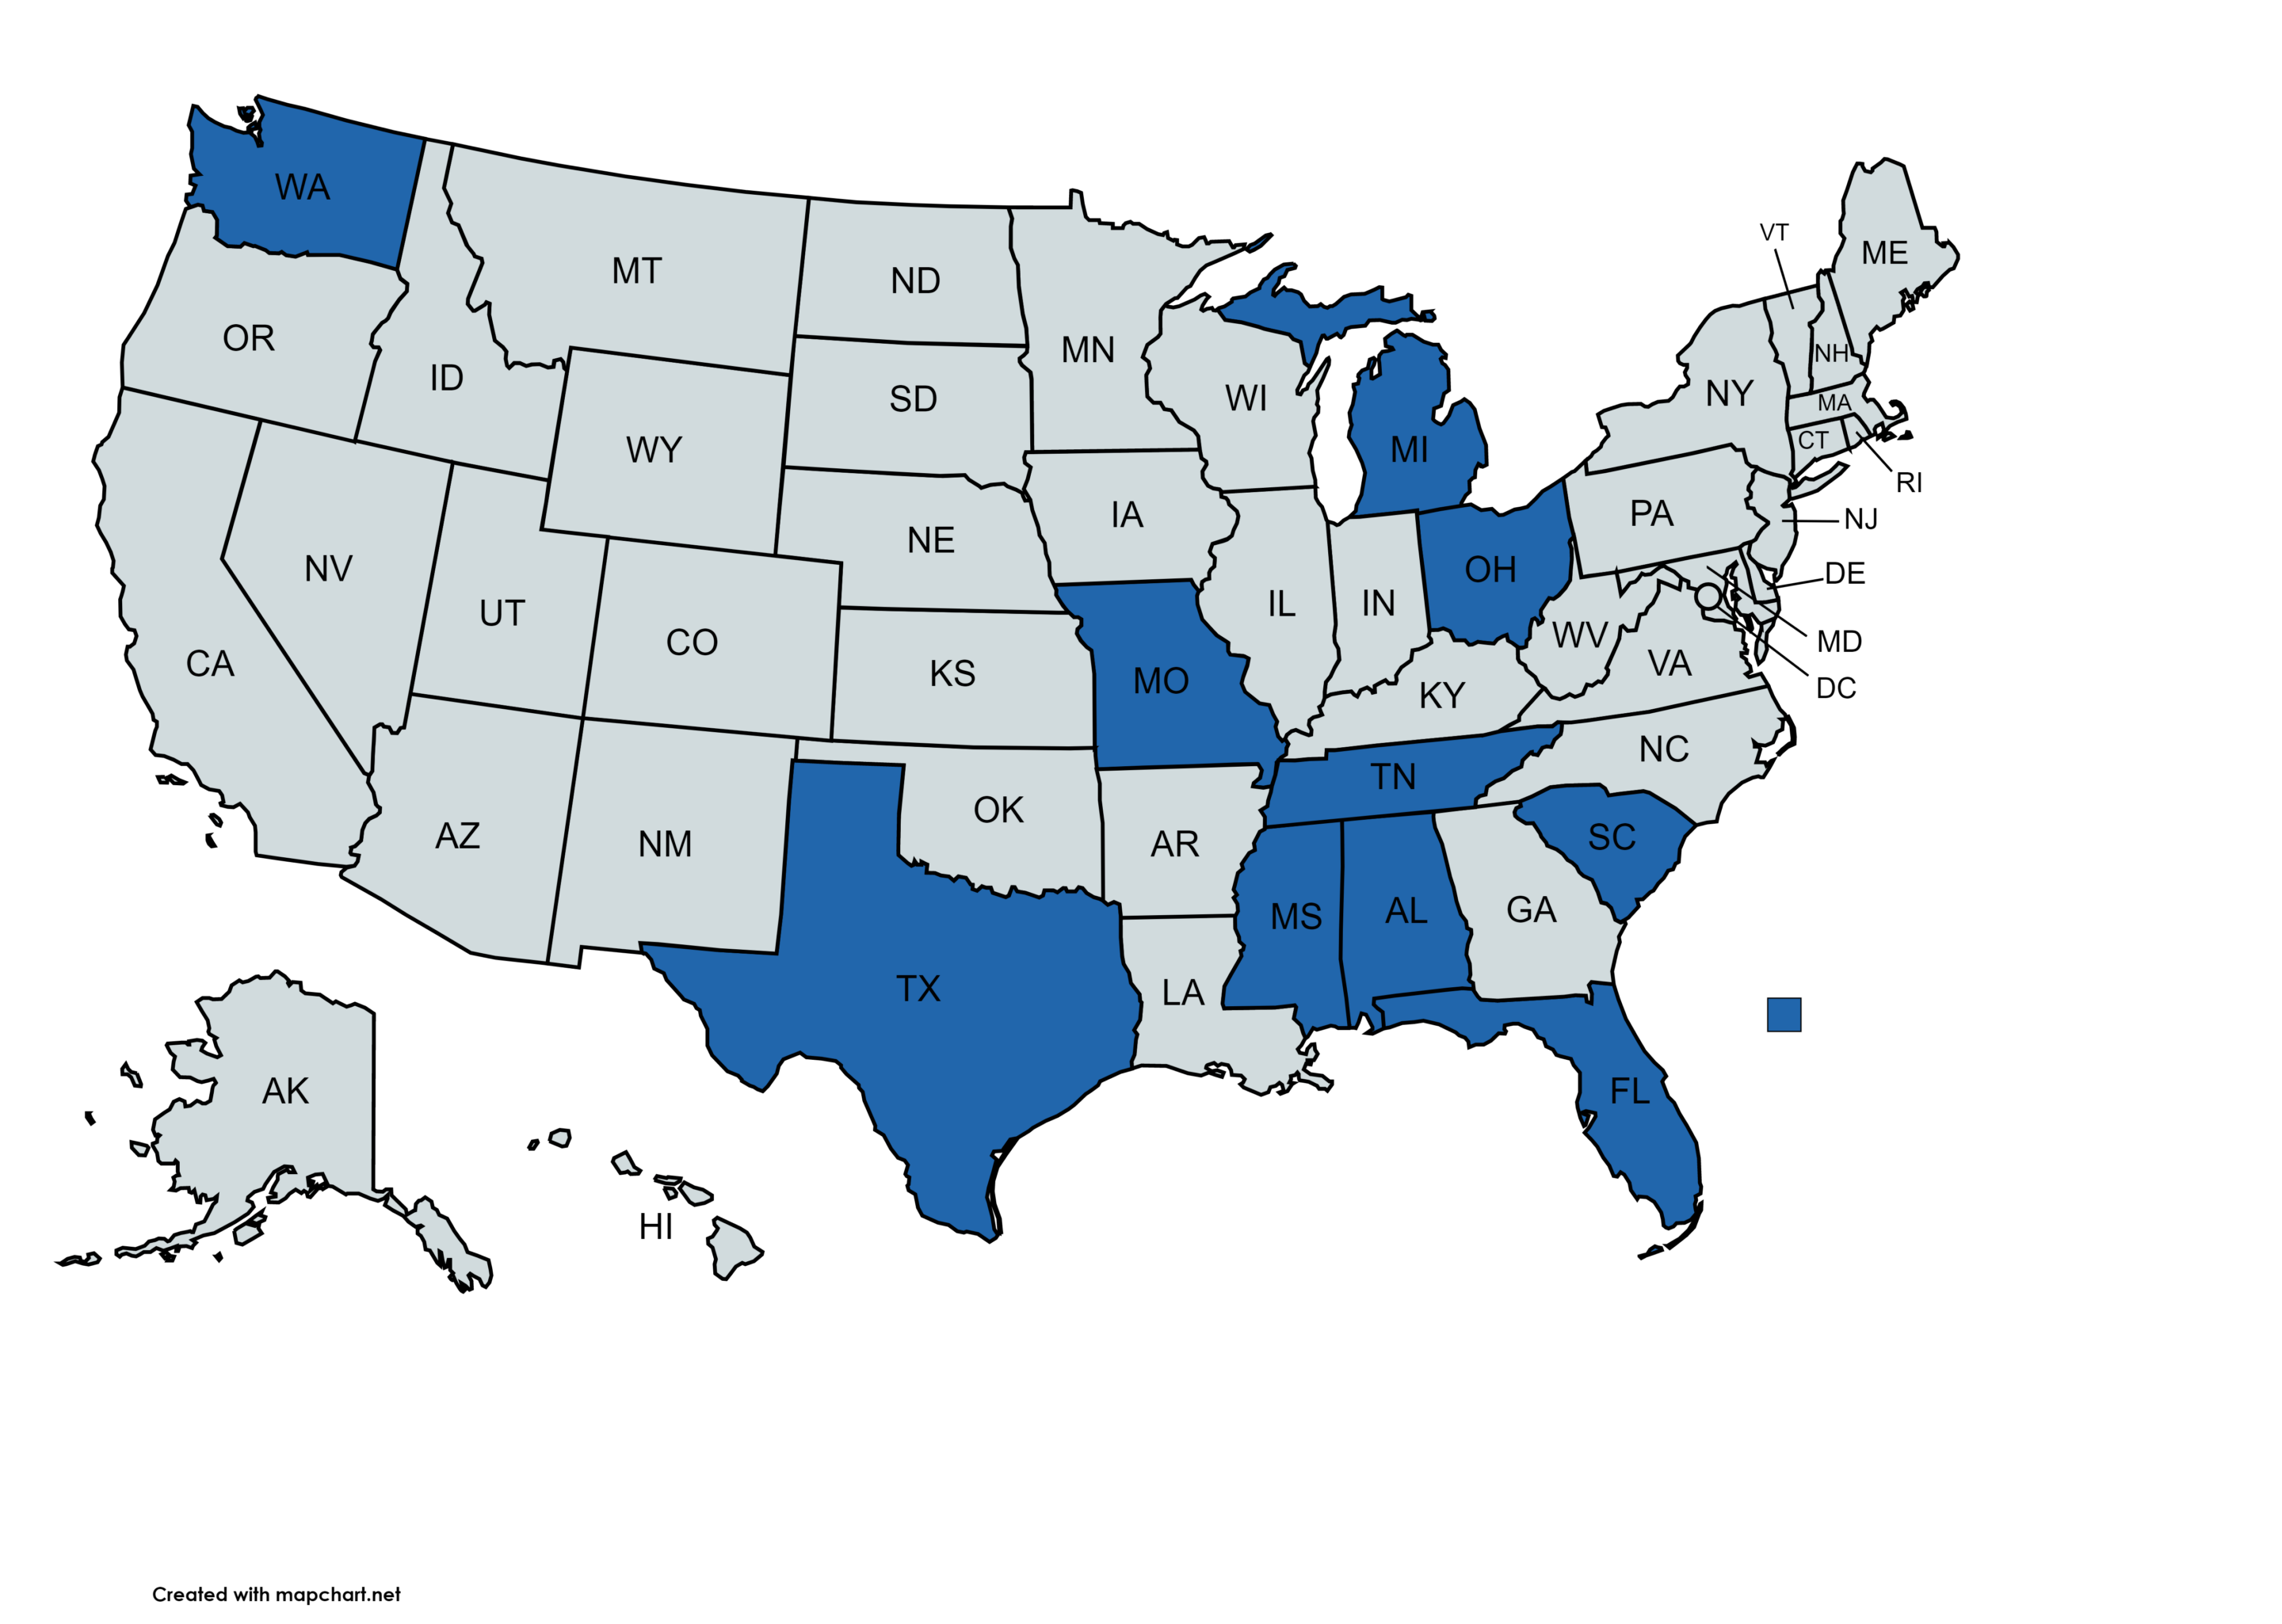 Map of the United States showing states that Acuity Health Advisors is licensed in